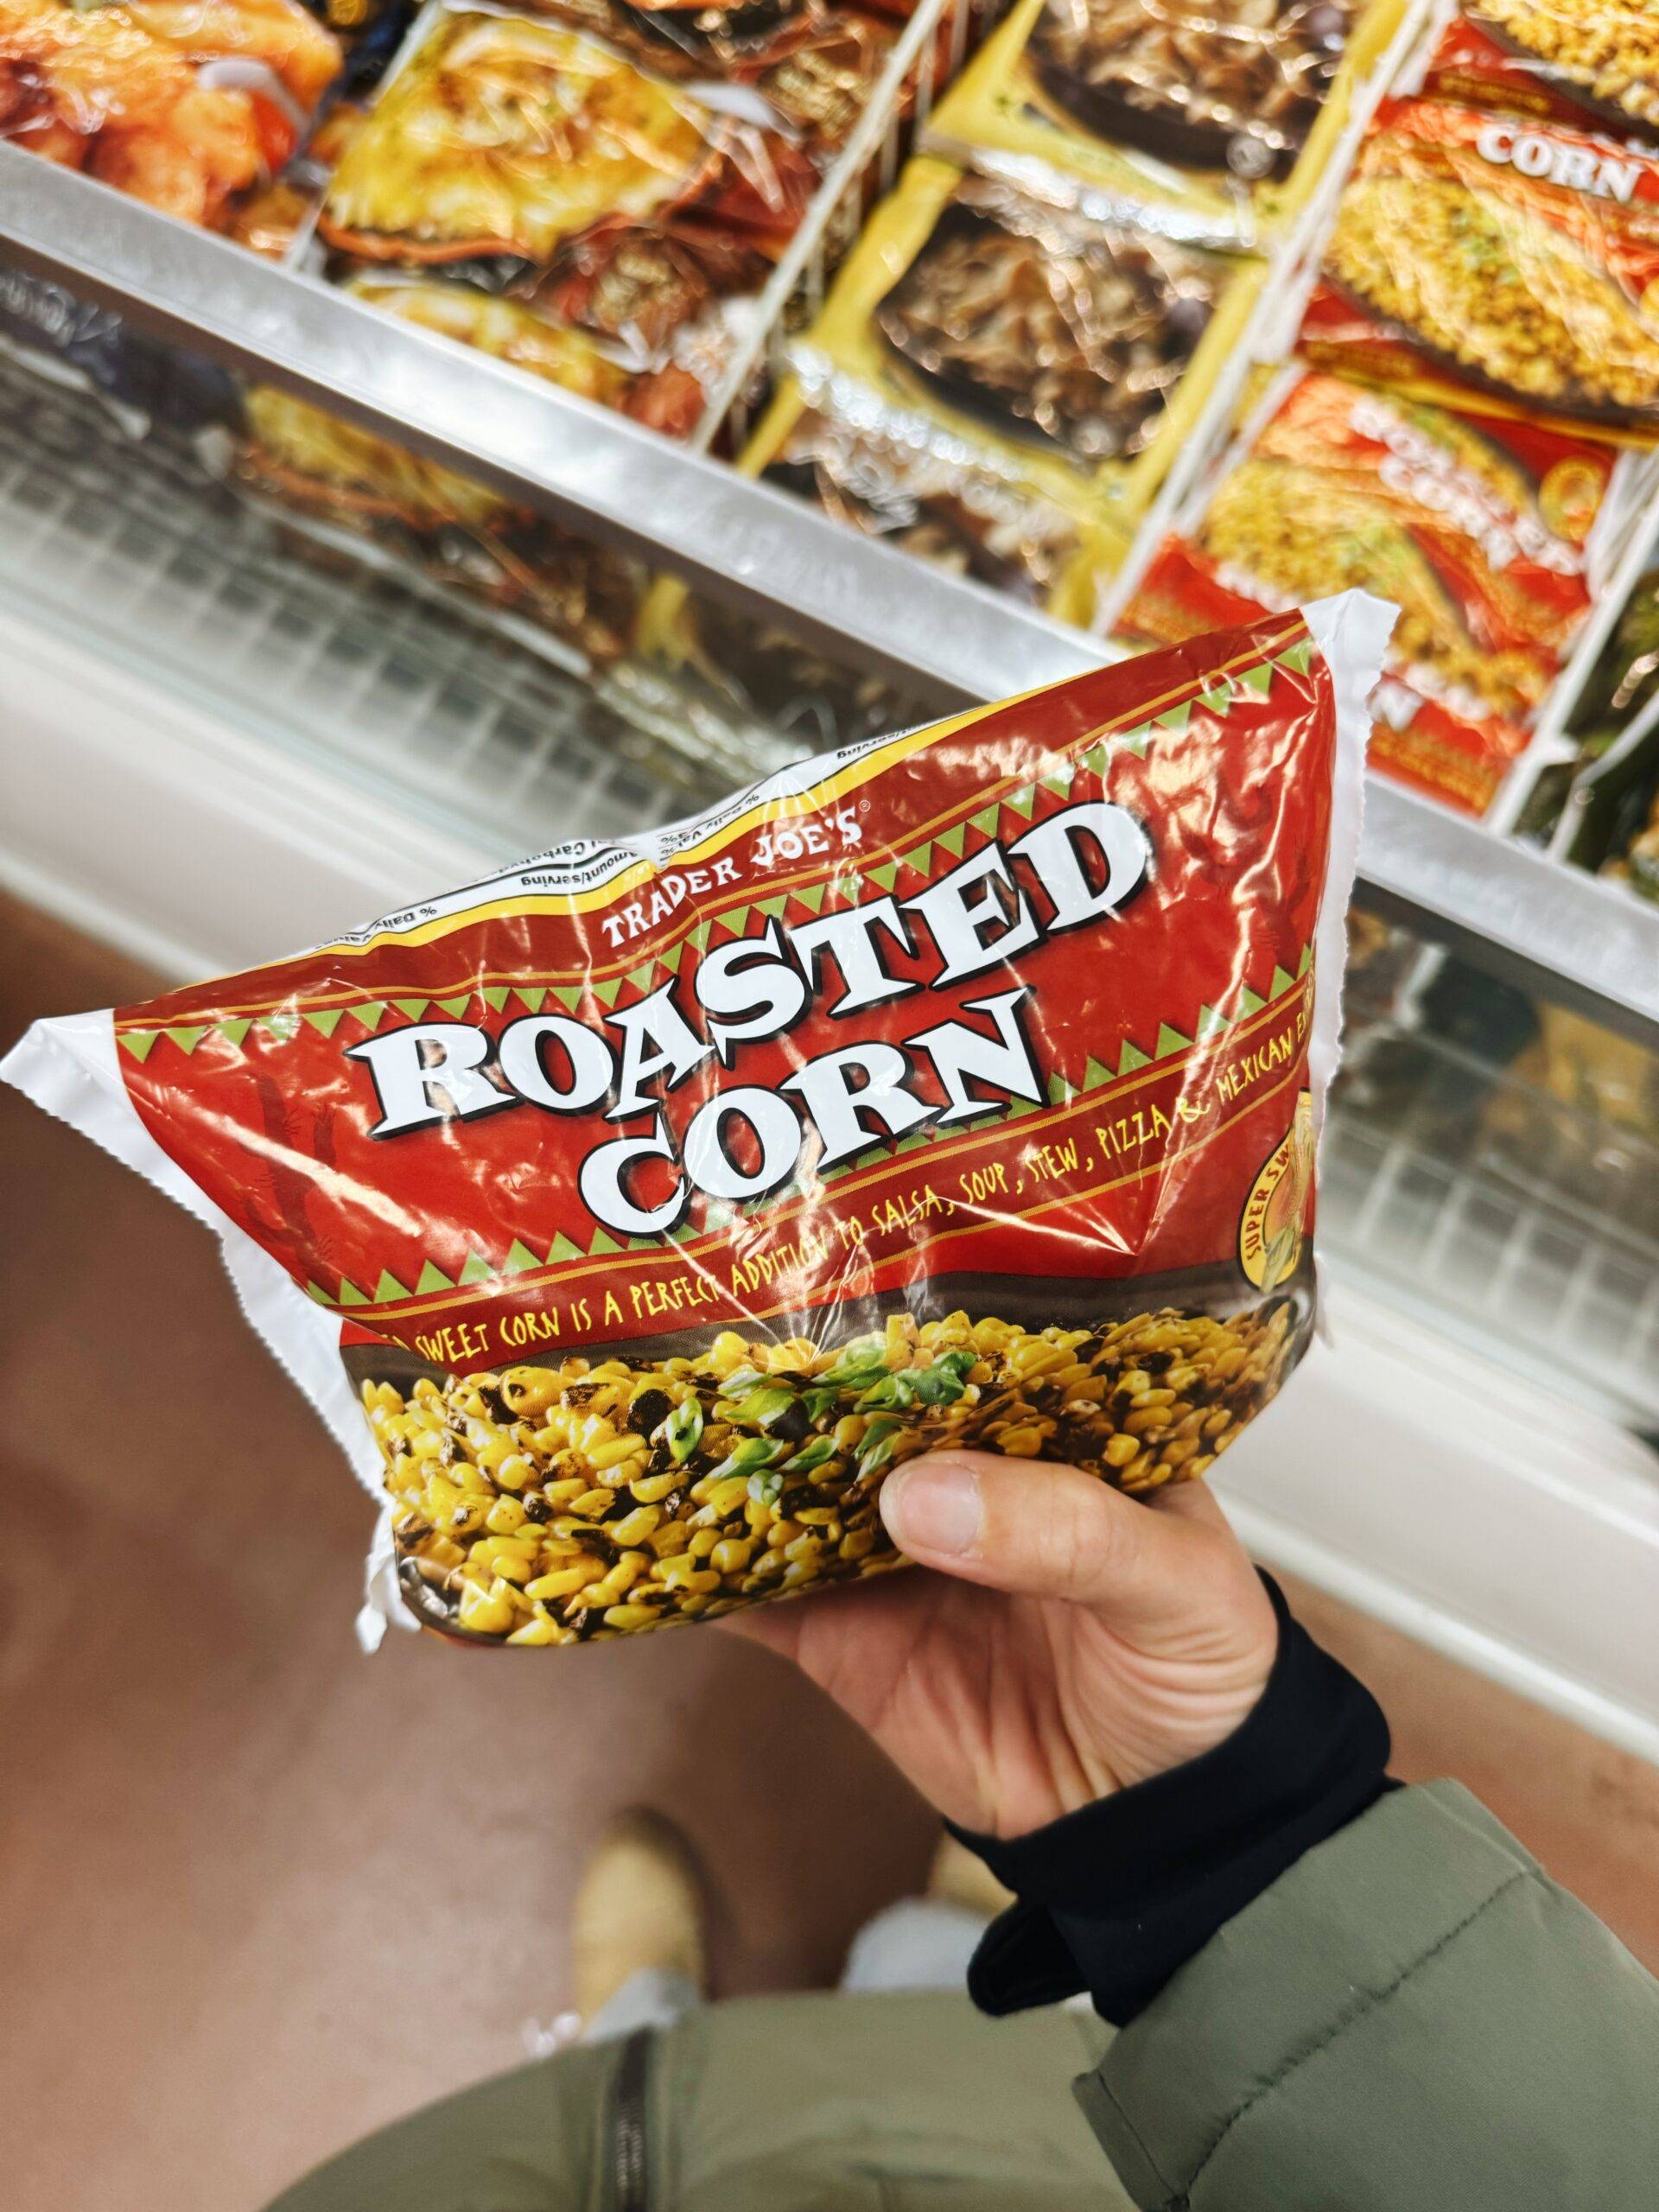 Roasted corn in a bag.